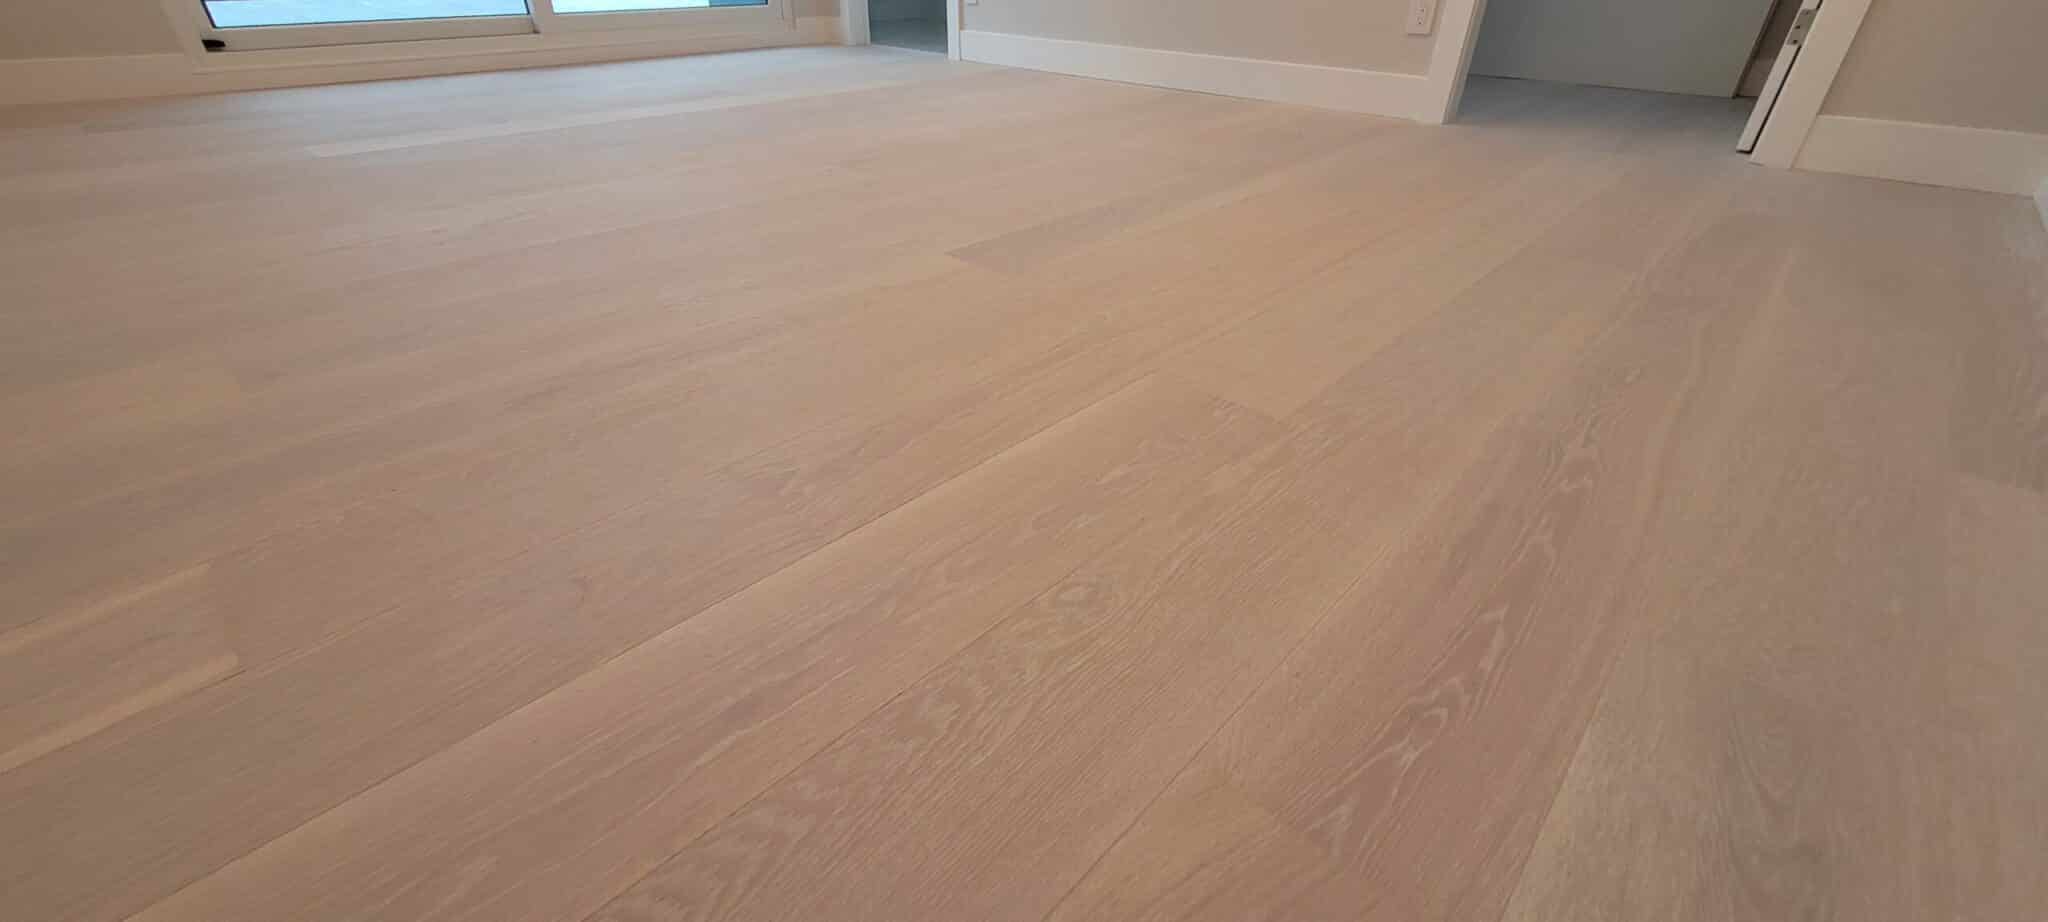 State-of-the-art Vancouver hardwood floor solutions